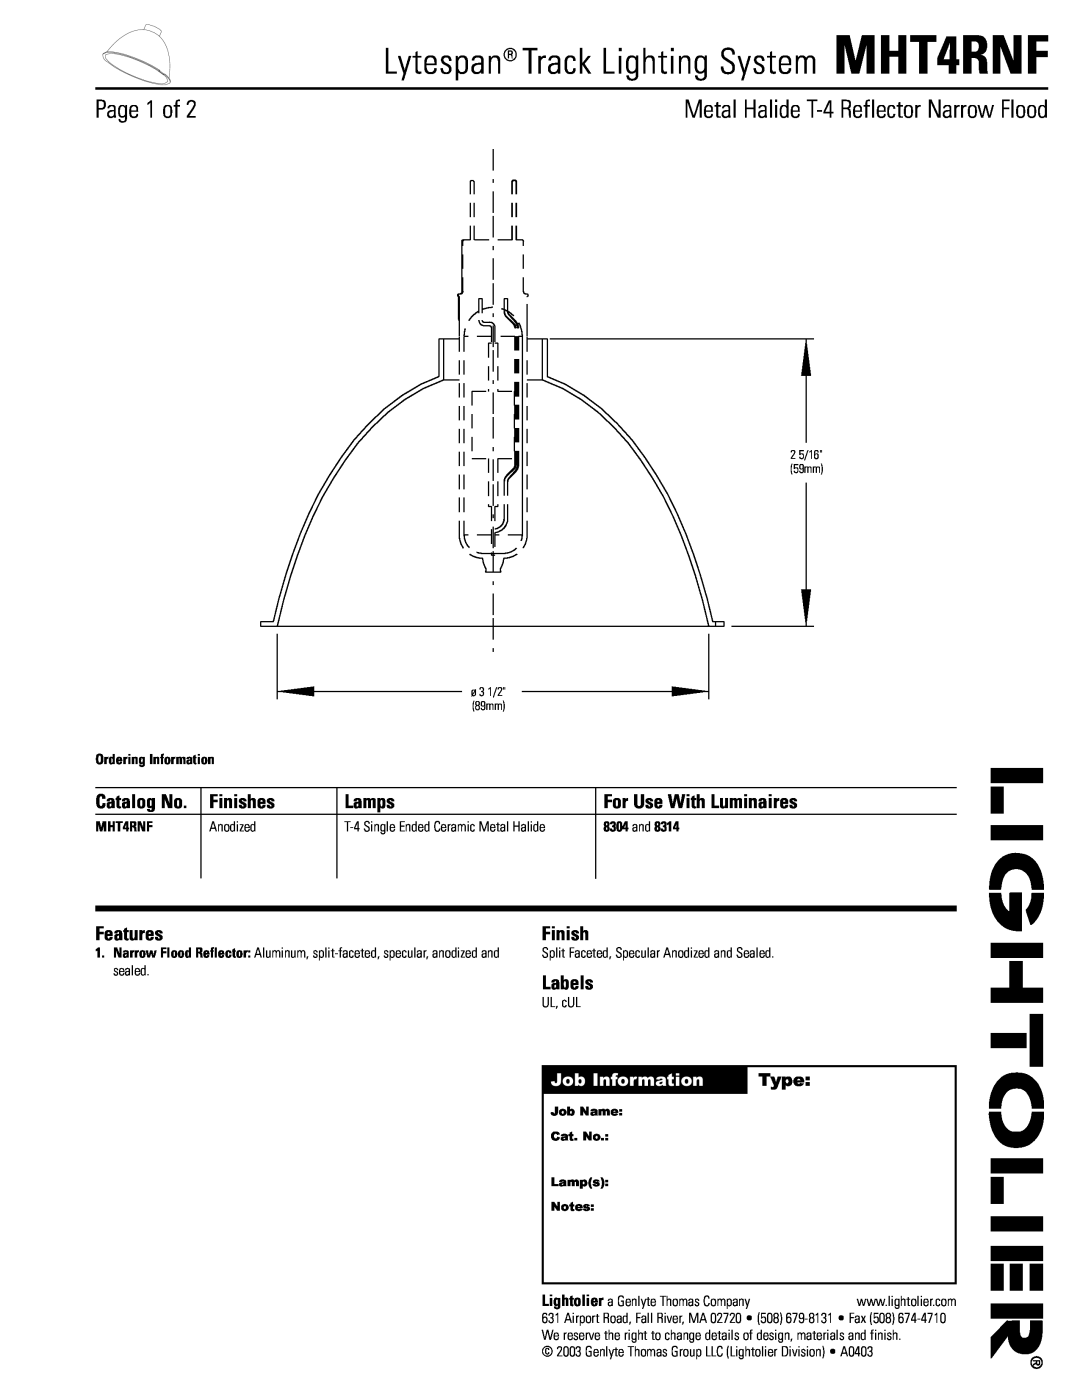 Lightolier manual Lytespan Track Lighting System MHT4RNF, Finishes, Lamps, For Use With Luminaires, Features, Labels 